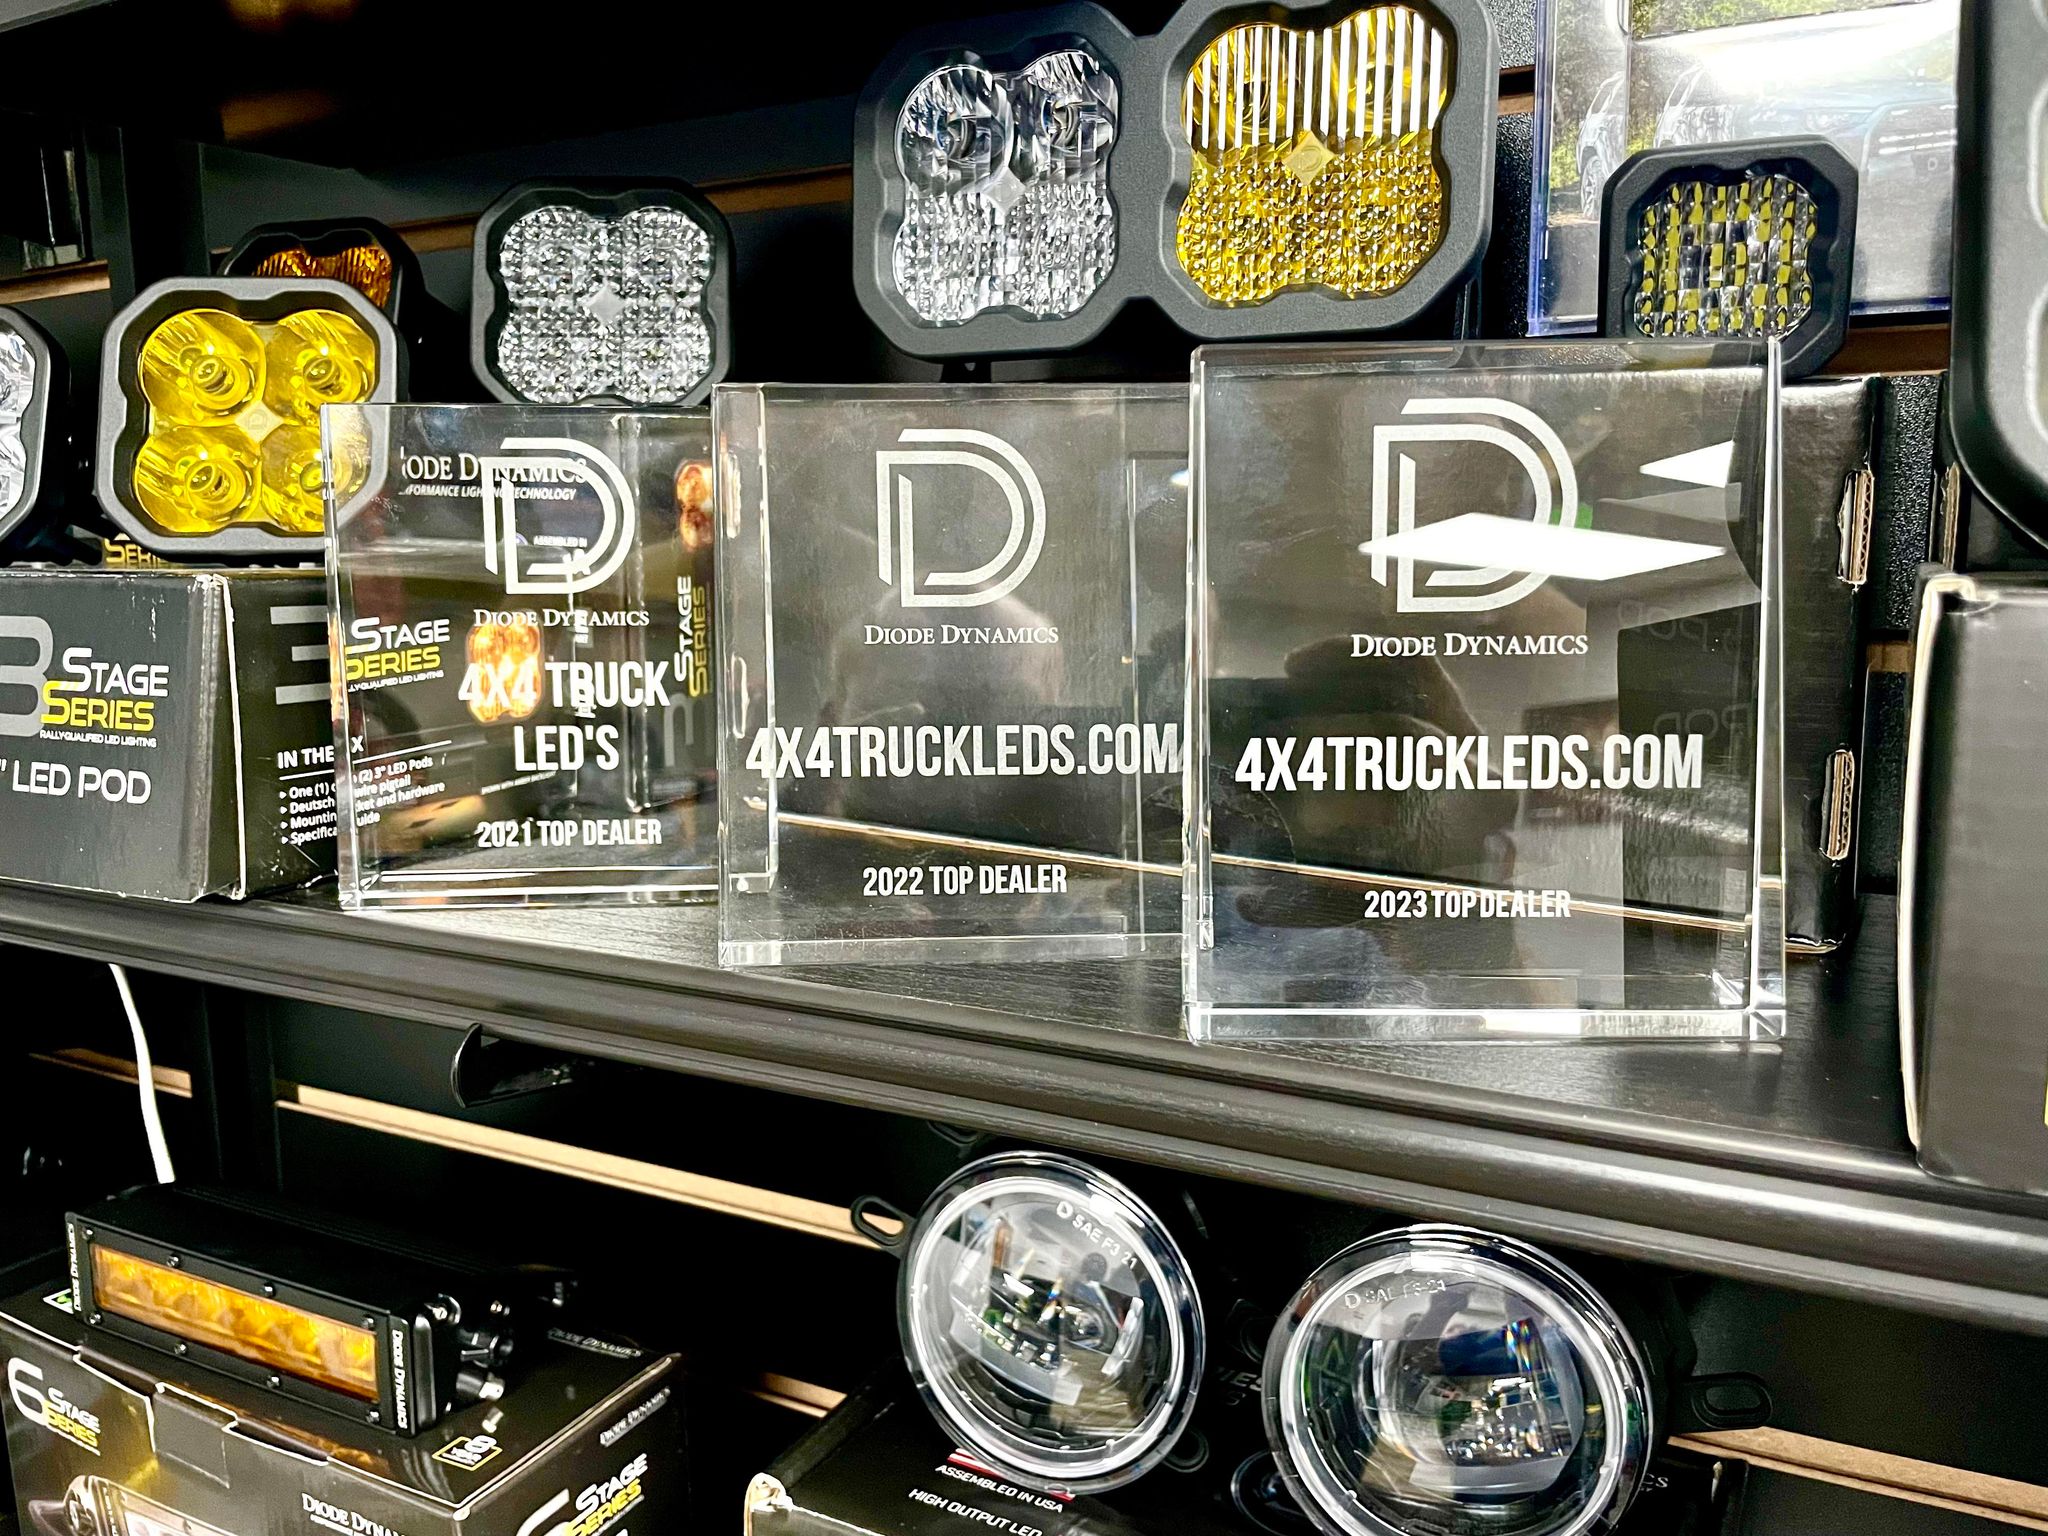 Ford Bronco 4x4TruckLEDs.com Awarded Diode Dynamics Top Dealers for 2023 2023 Award